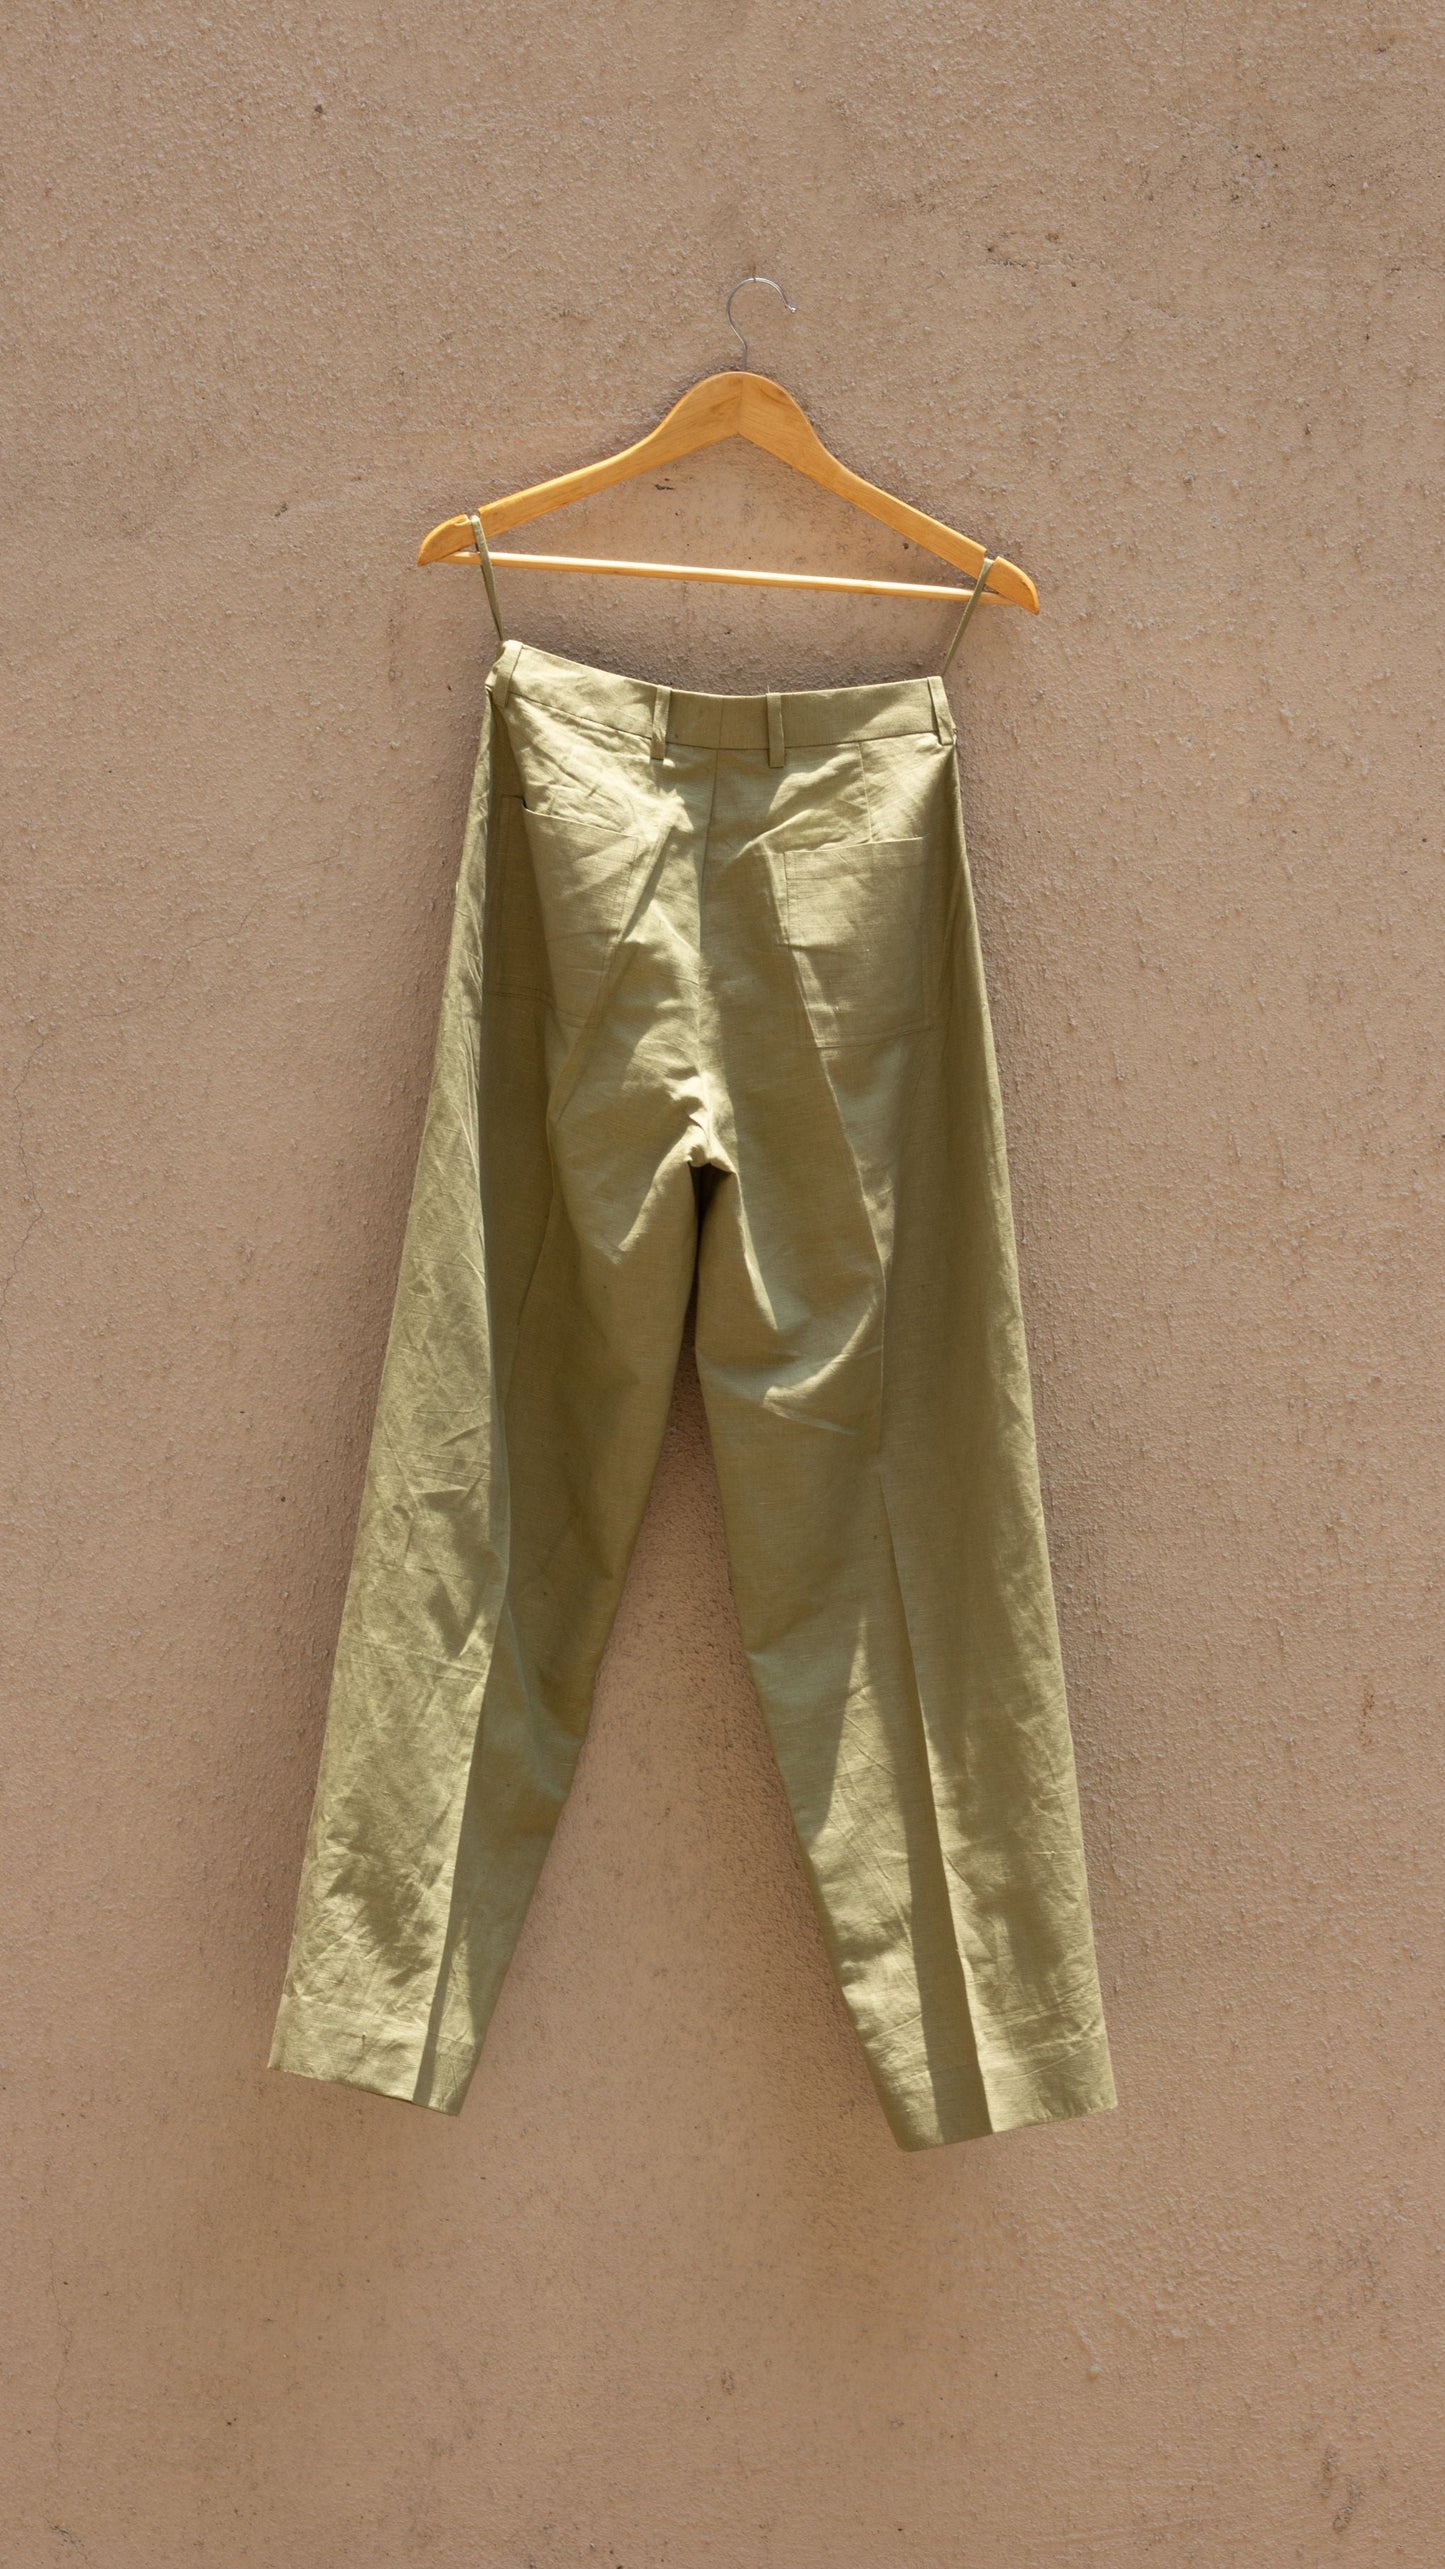 Green Casual Pants by Anushé Pirani with Casual Wear, Cotton, Cotton Hemp, For Him, Green, Handwoven, Hemp, Mens Bottom, Menswear, Pants, Relaxed Fit, Shibumi Collection, Solids at Kamakhyaa for sustainable fashion